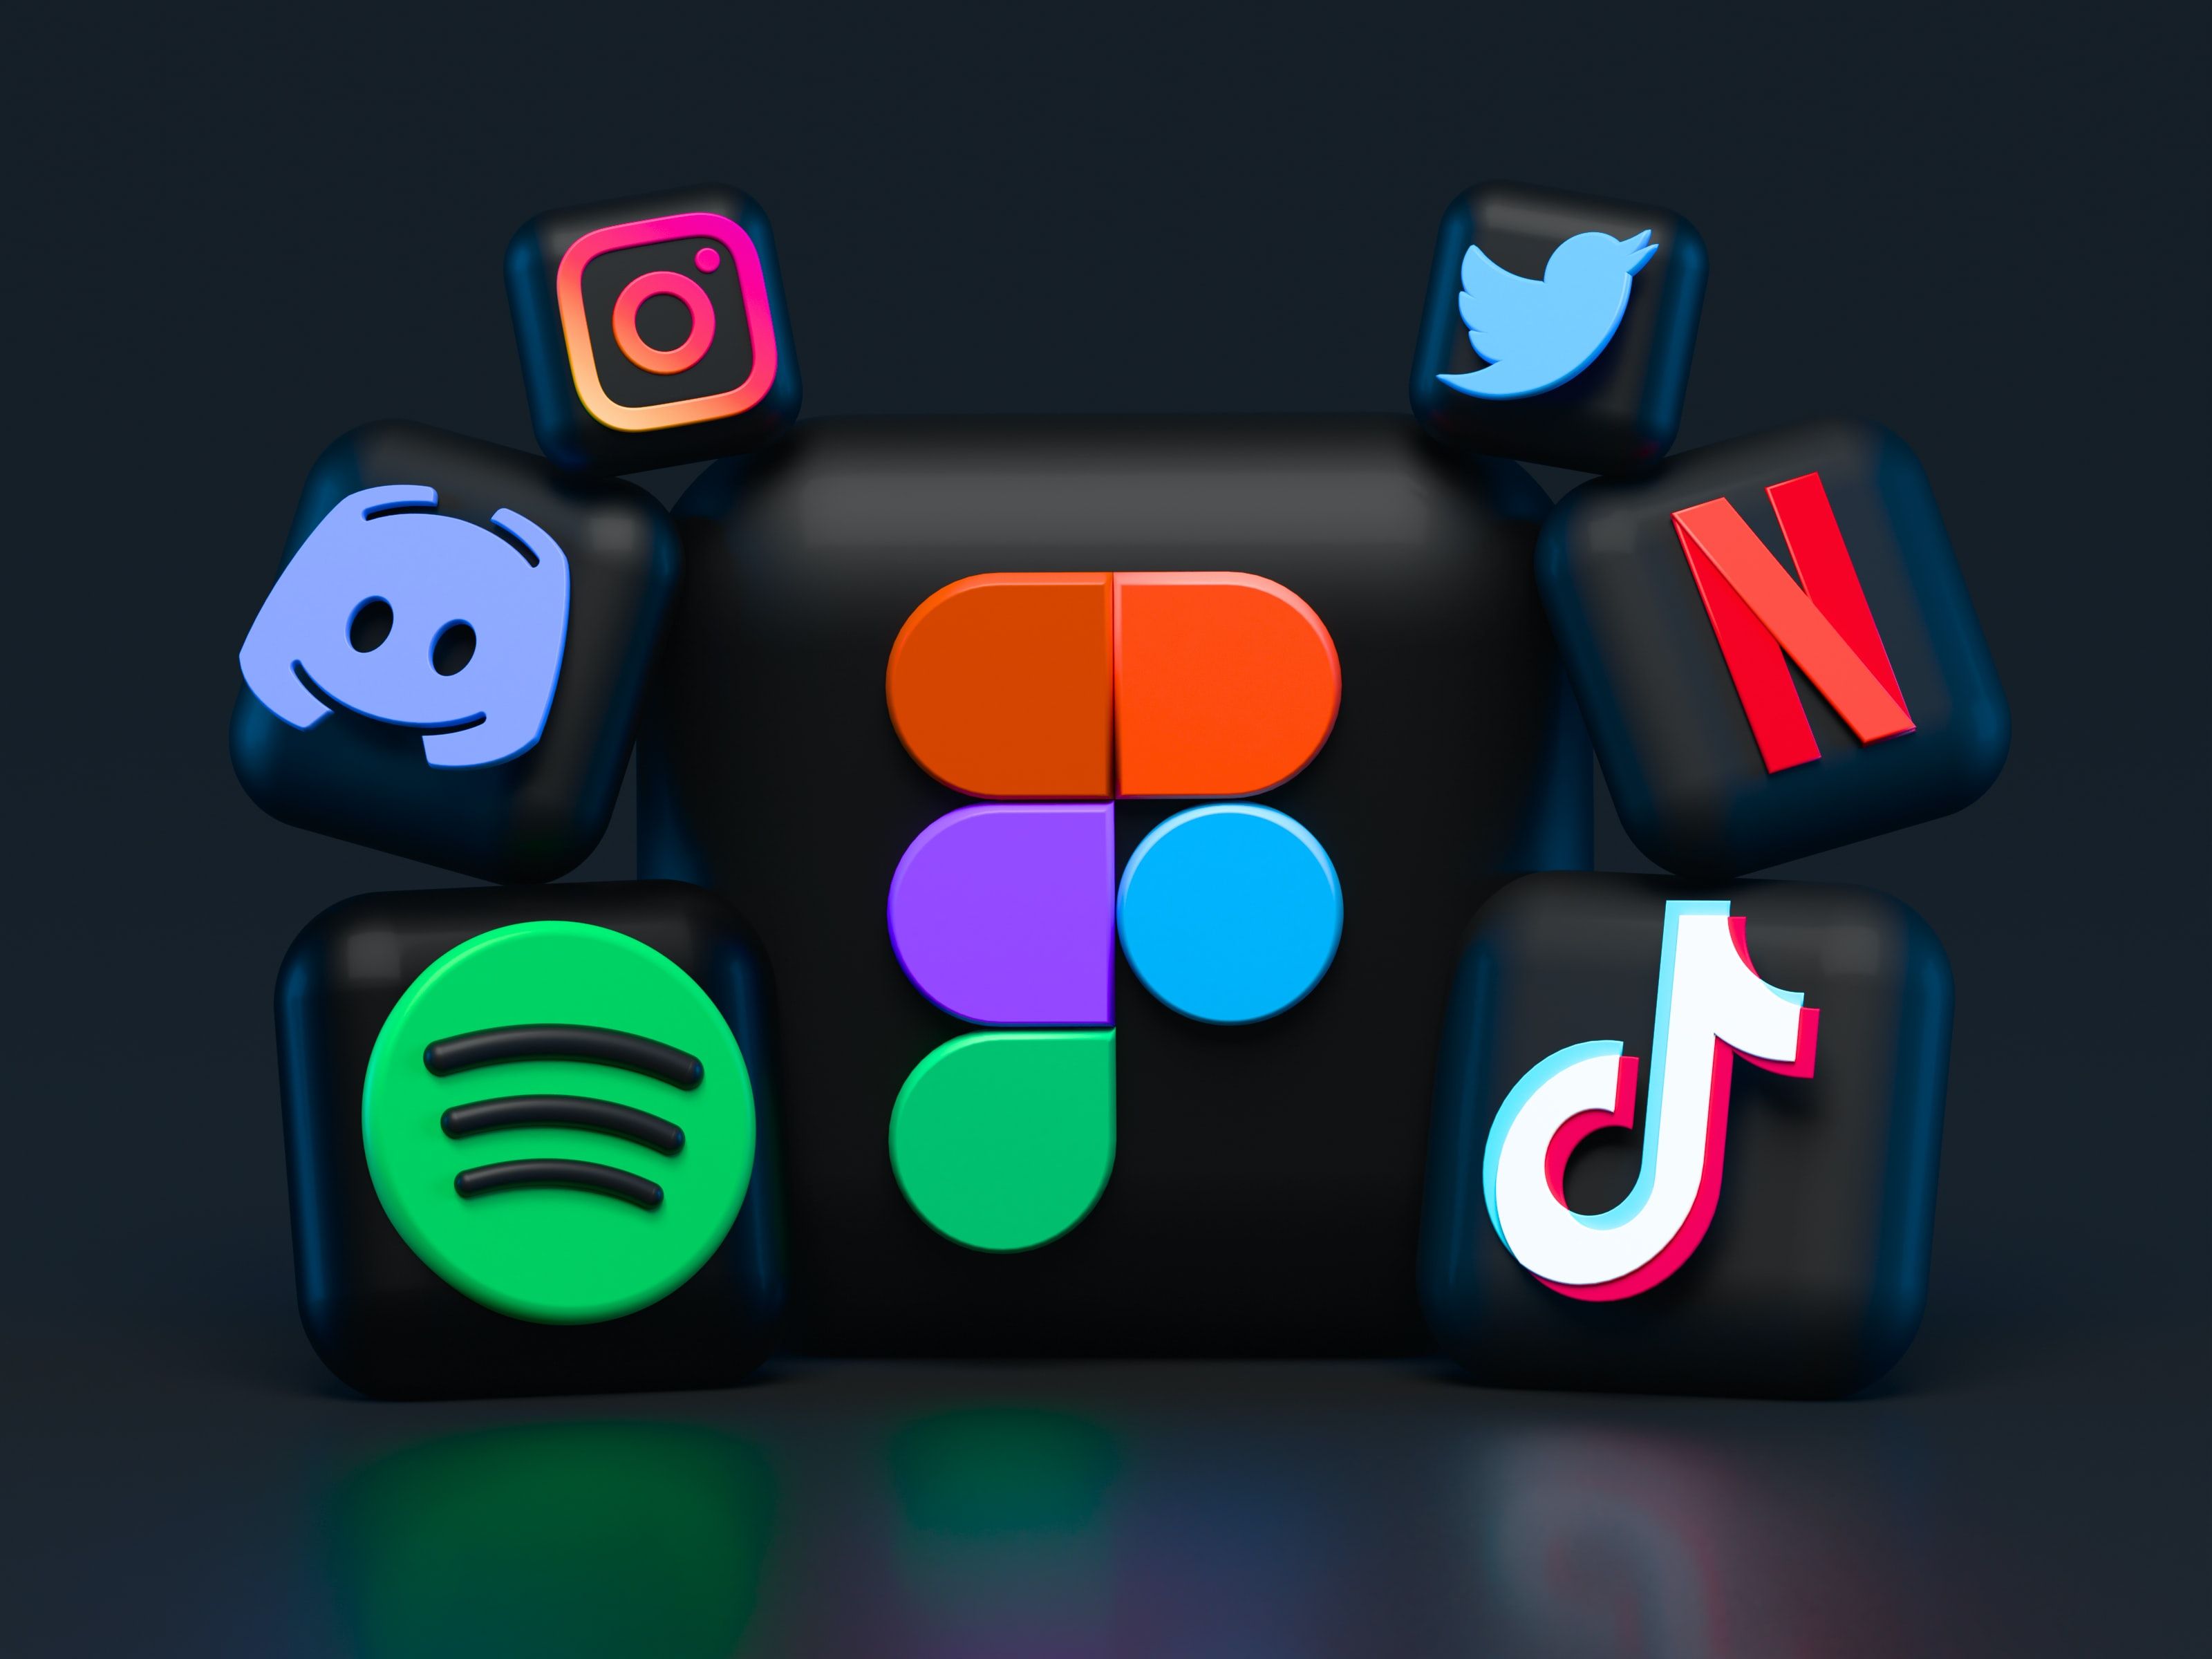 A bunch of social media icons over black.